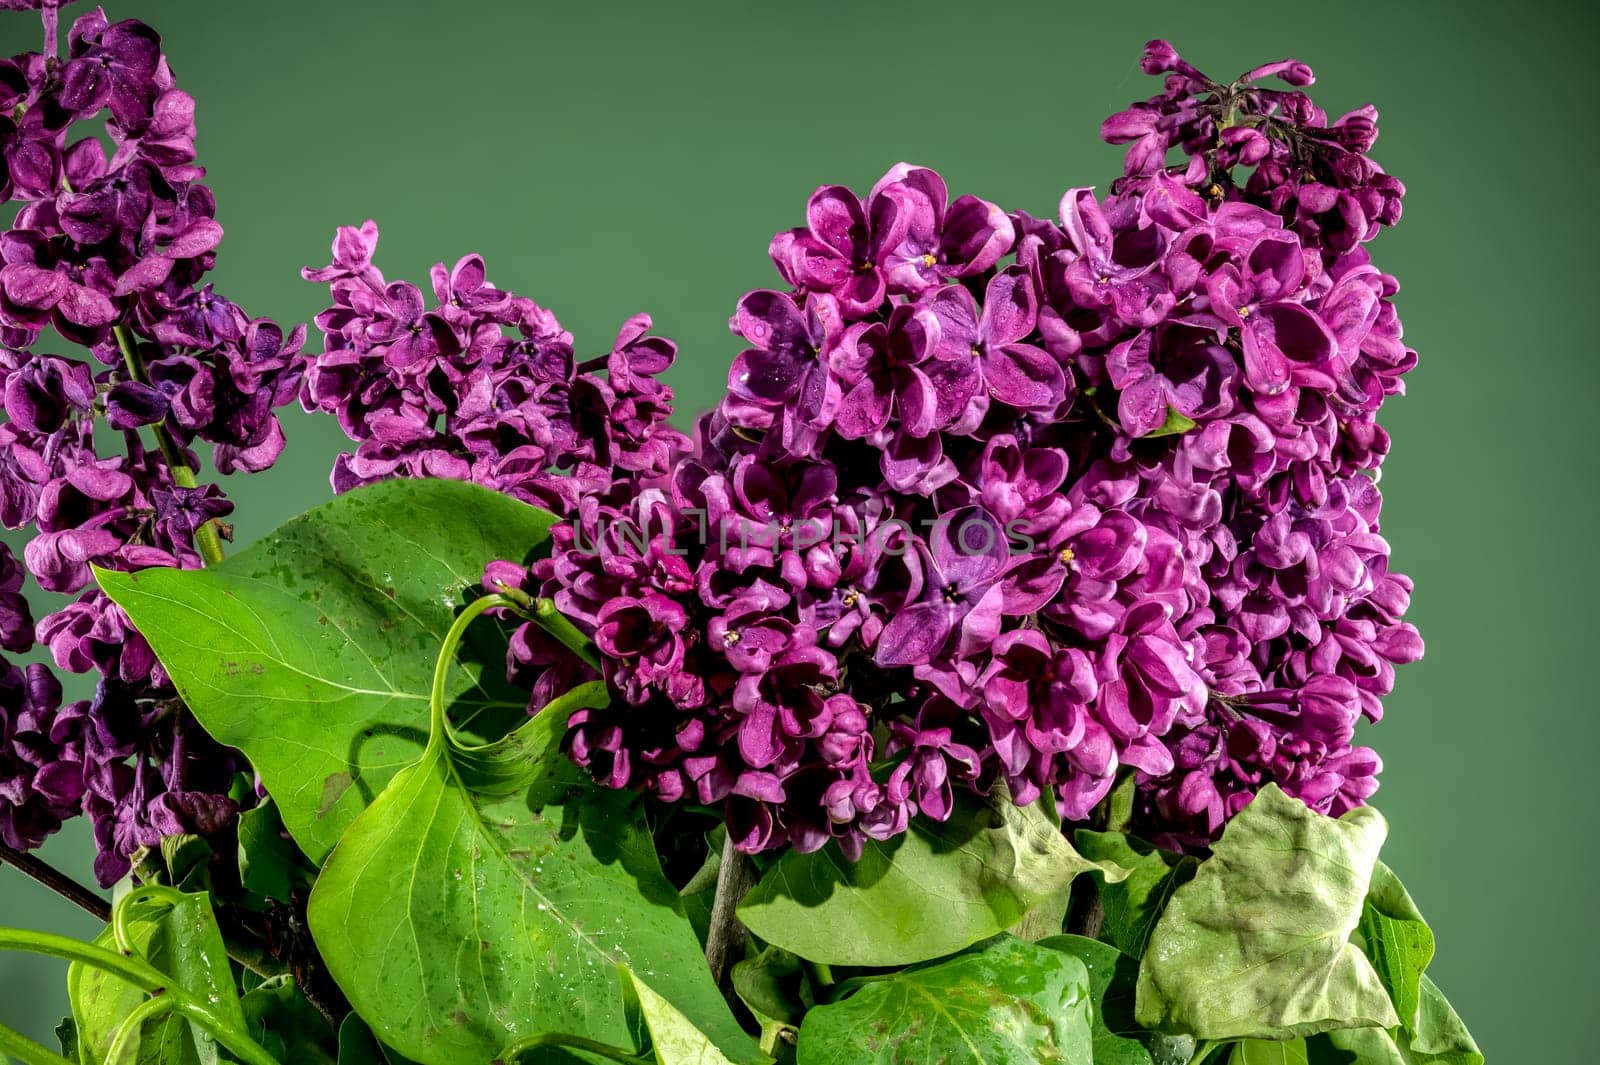 Beautiful blooming dark purple lilac on a green background. Flower head close-up.